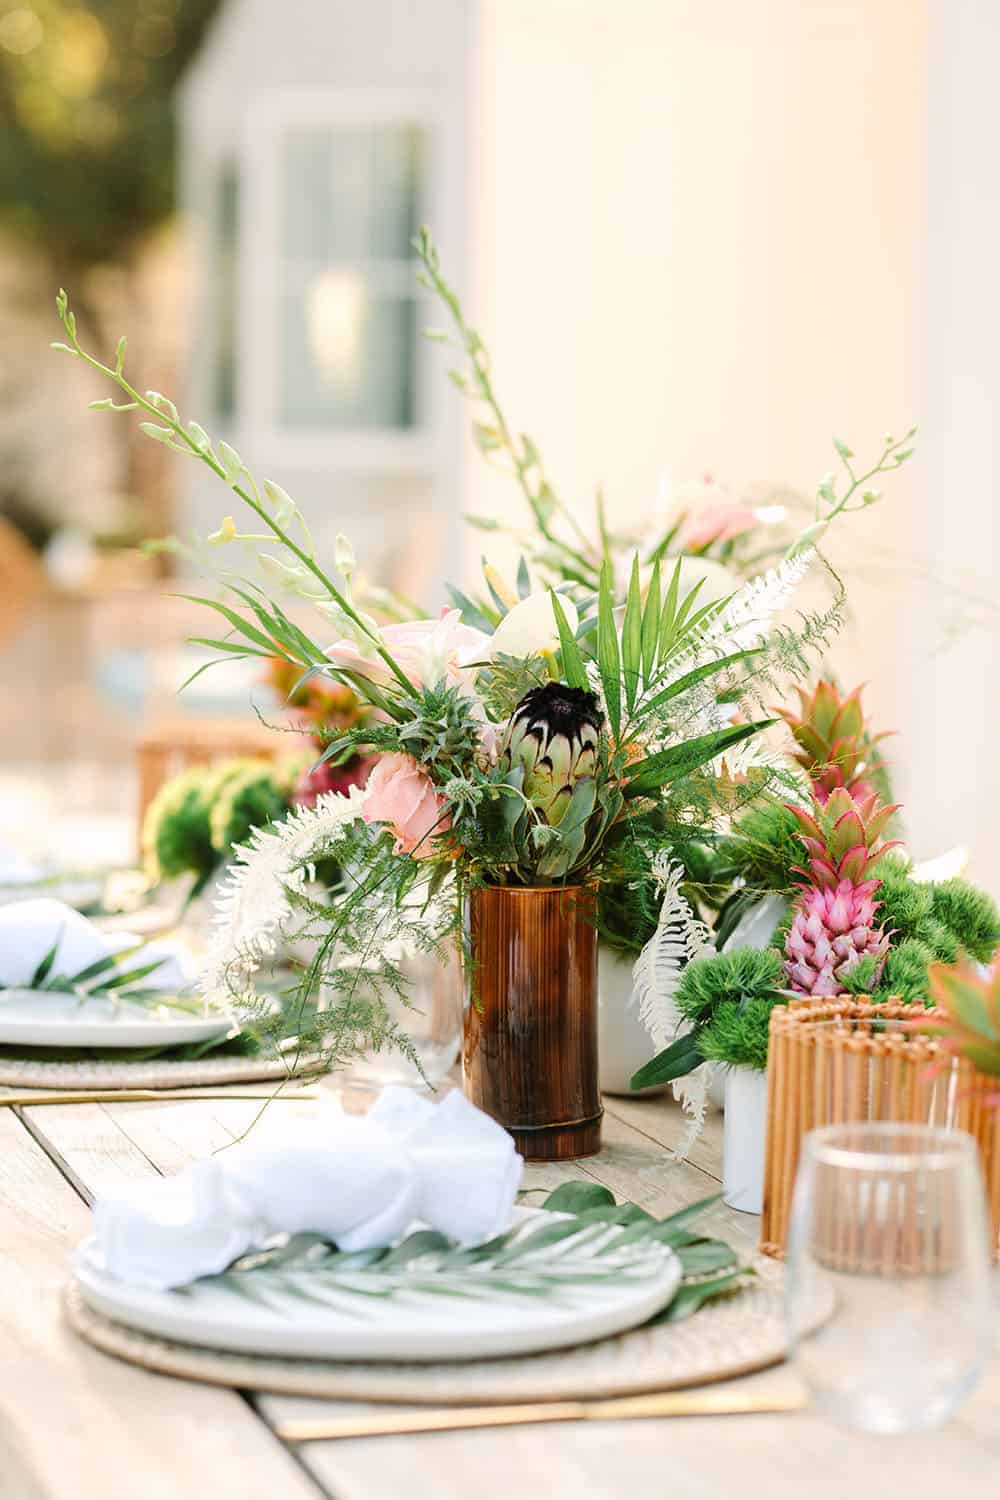 Tropical birthday party with flowers and a table setting.